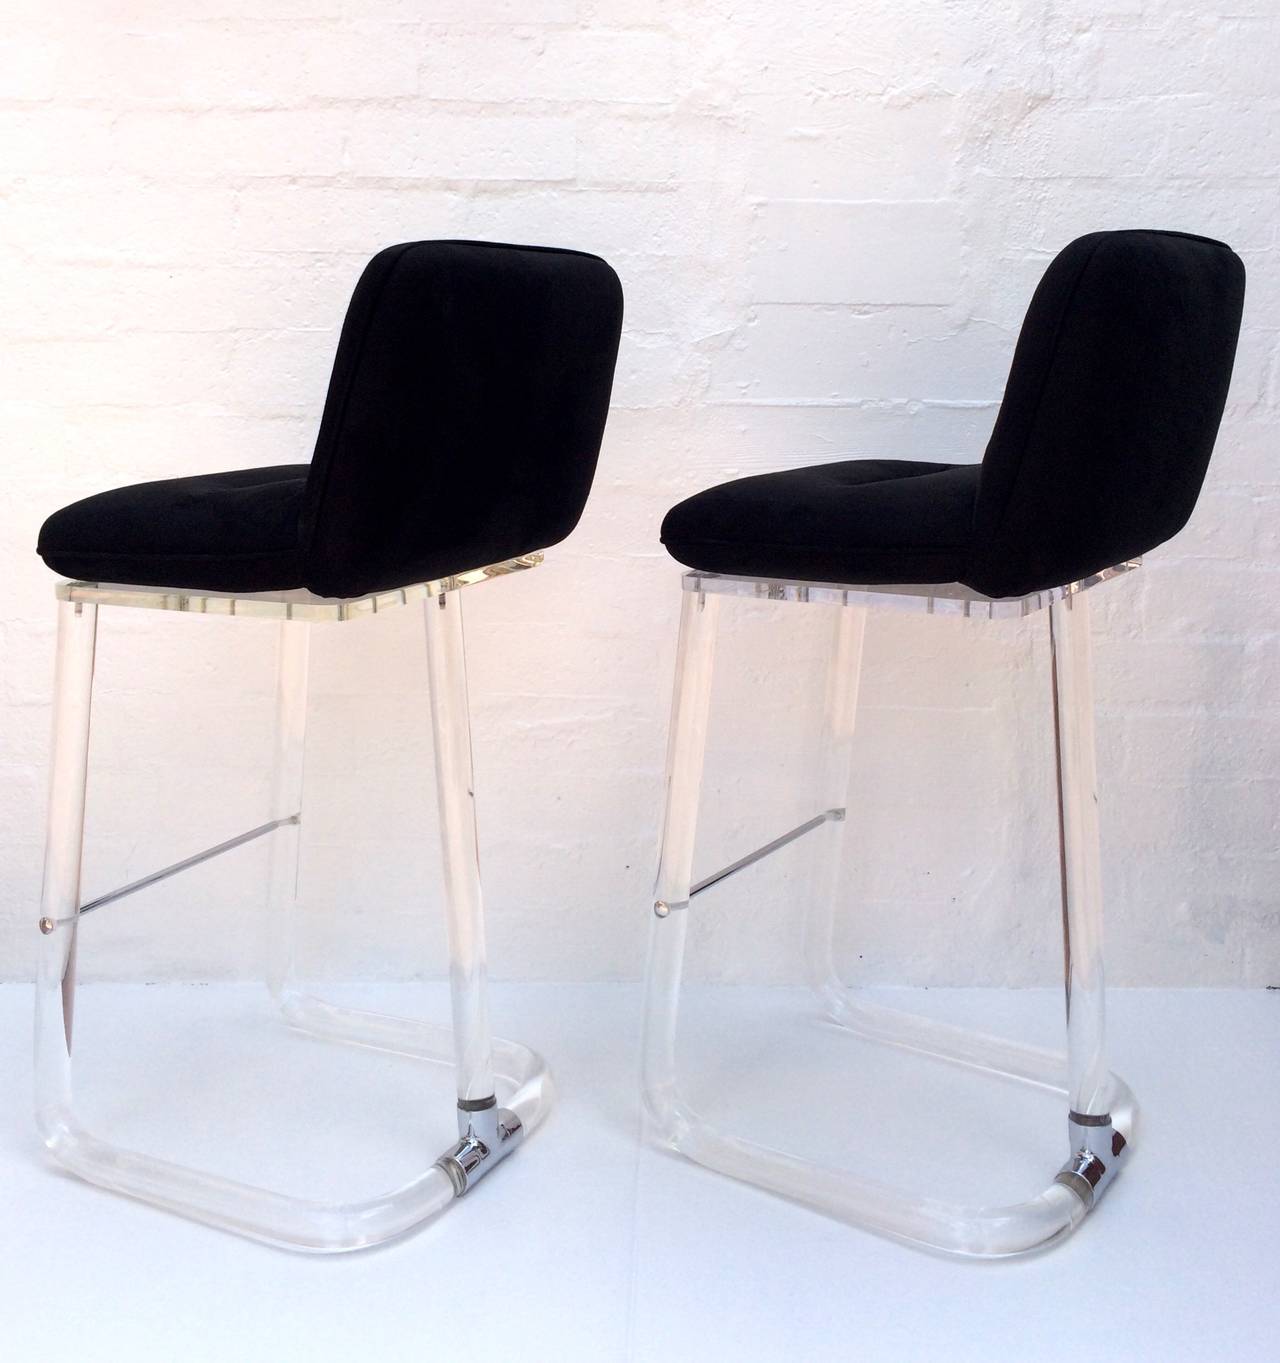 These stunning stools are acrylic with polished chrome foot bar and polished chrome t-bar holding the back back support and bottom together. 
They have the original black ultrasuede leather upholstery.  
Newly professionally polished. 
Both